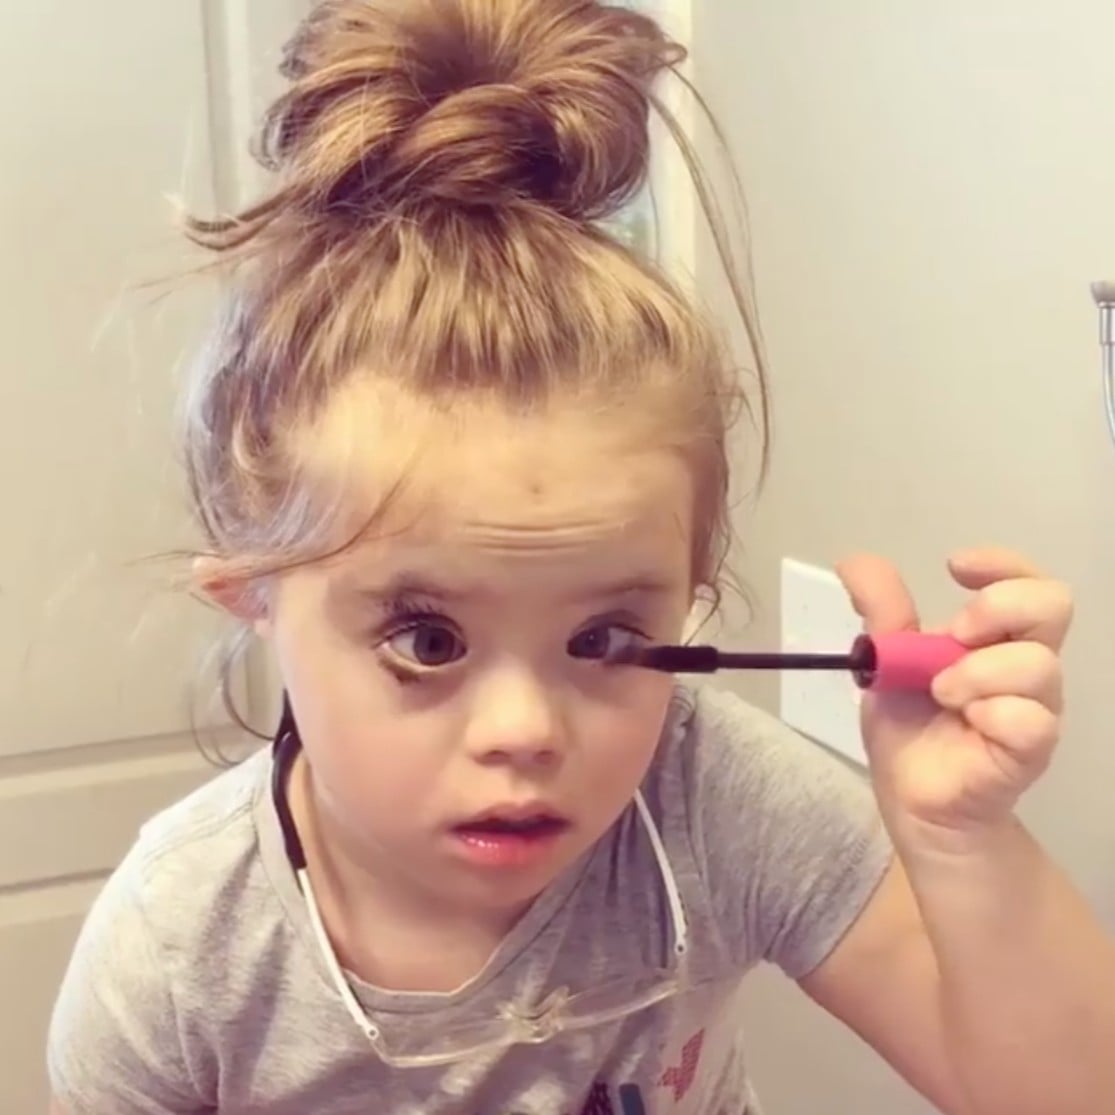 Girl With Down Syndrome Putting On Her Own Makeup Popsugar Family